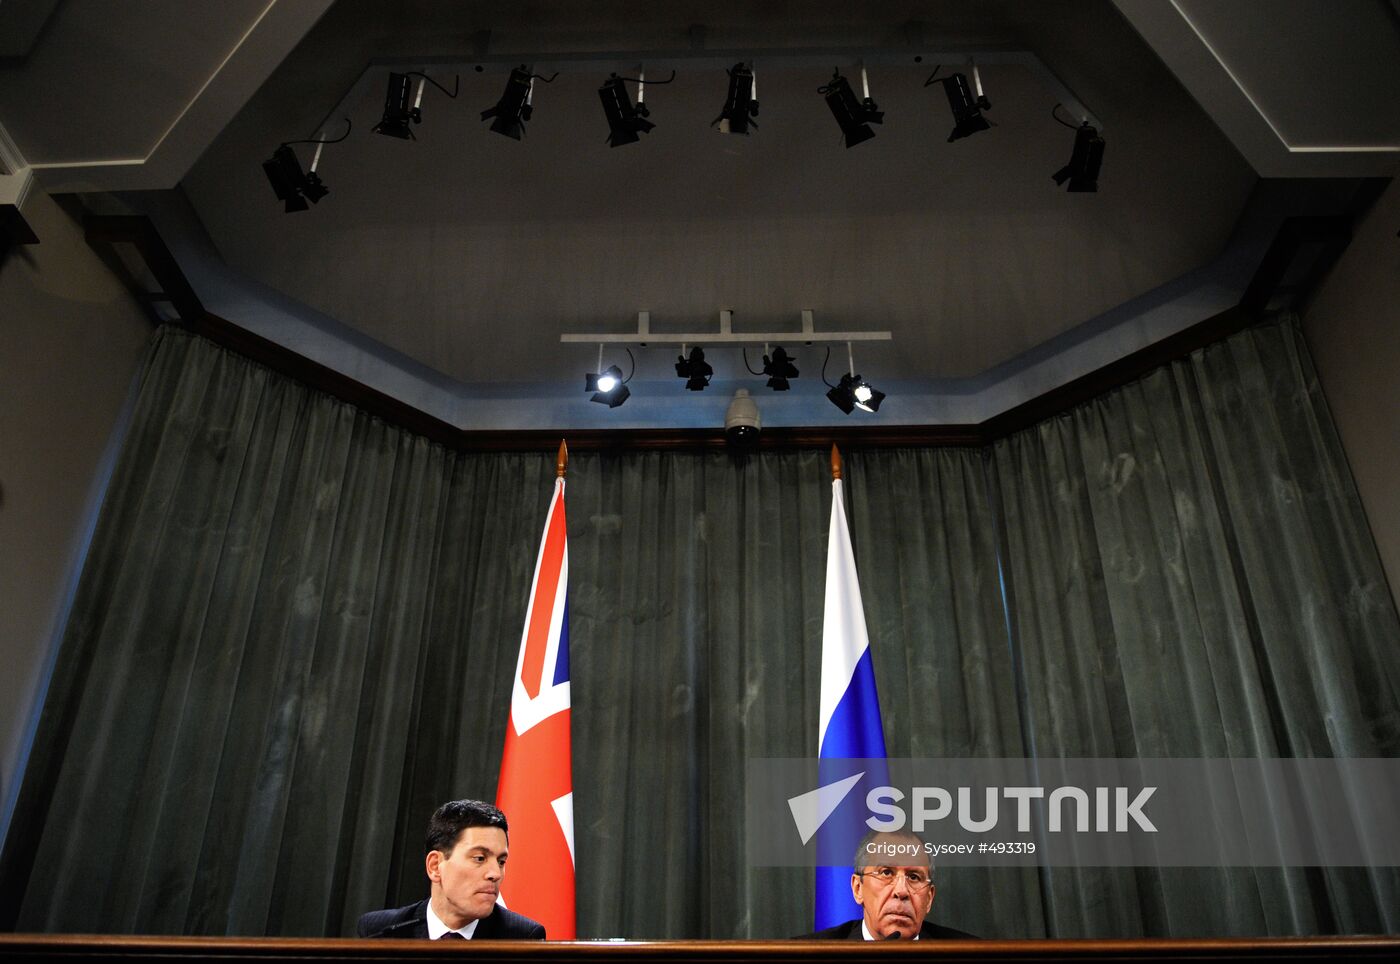 Sergei Lavrov and David Miliband meet in Moscow